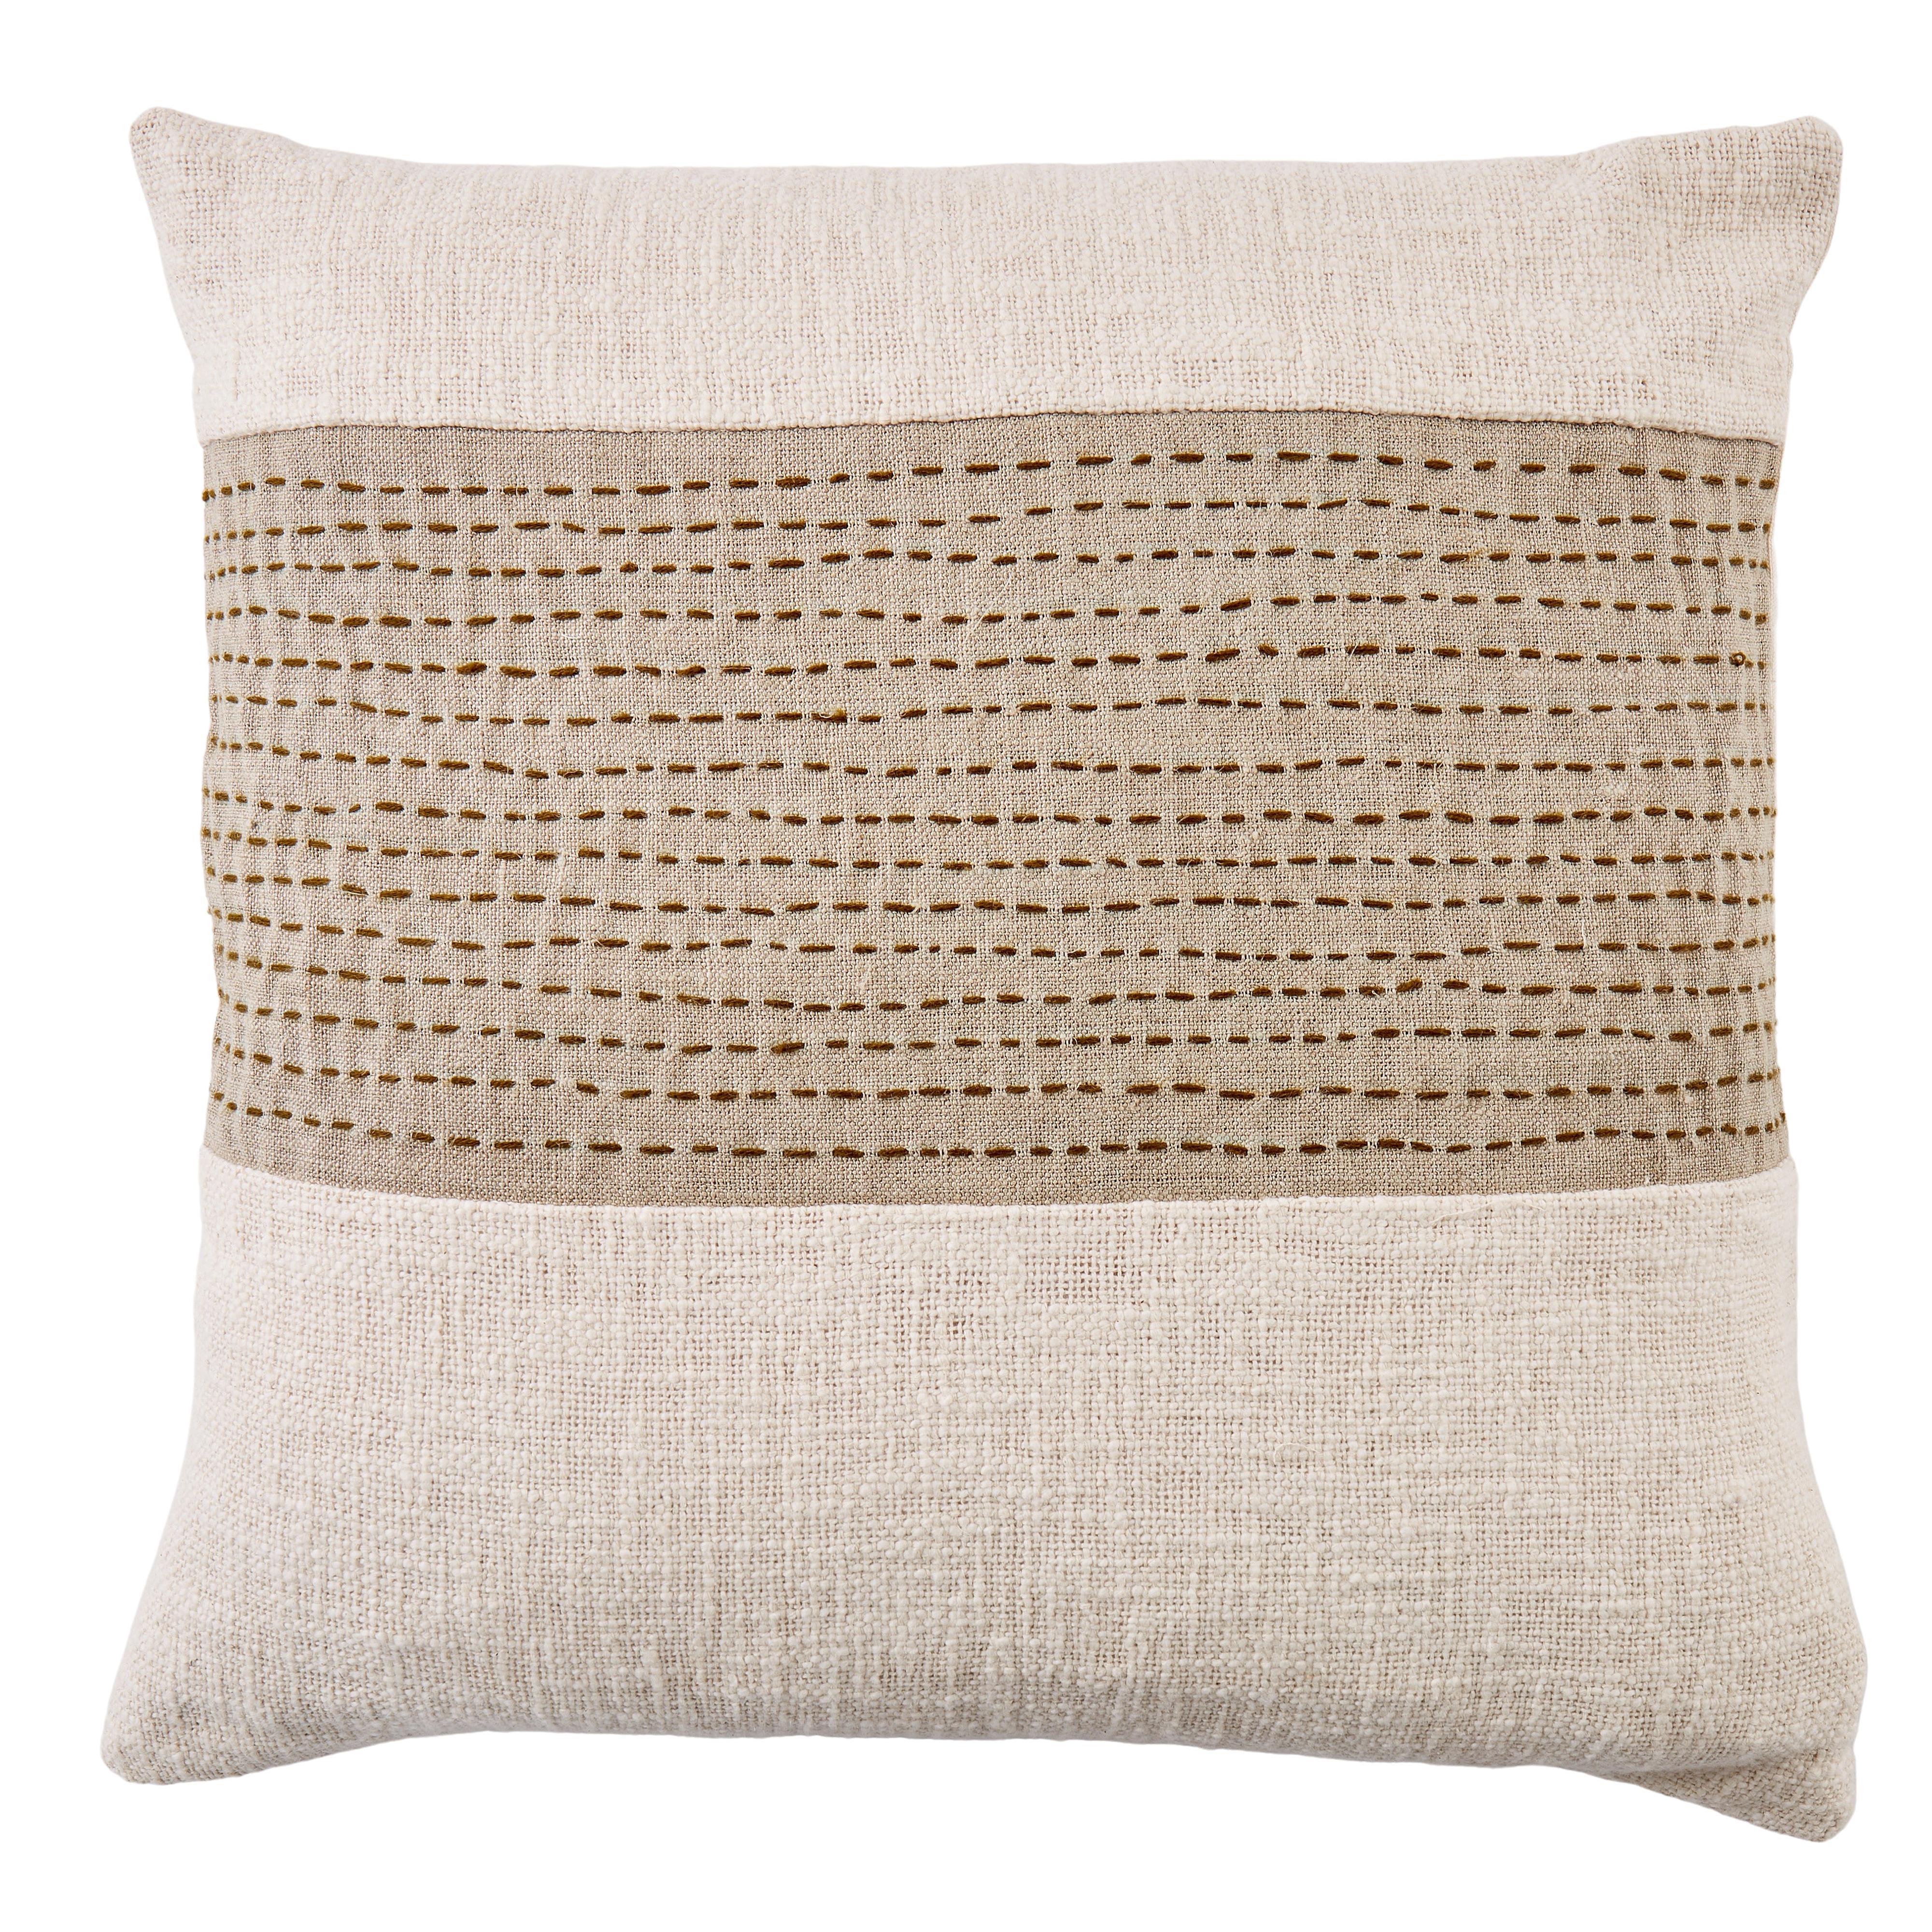 Amalfi Decorative Cushion Woven Stitch Soft Cotton Throw Pillow For Couch Bed